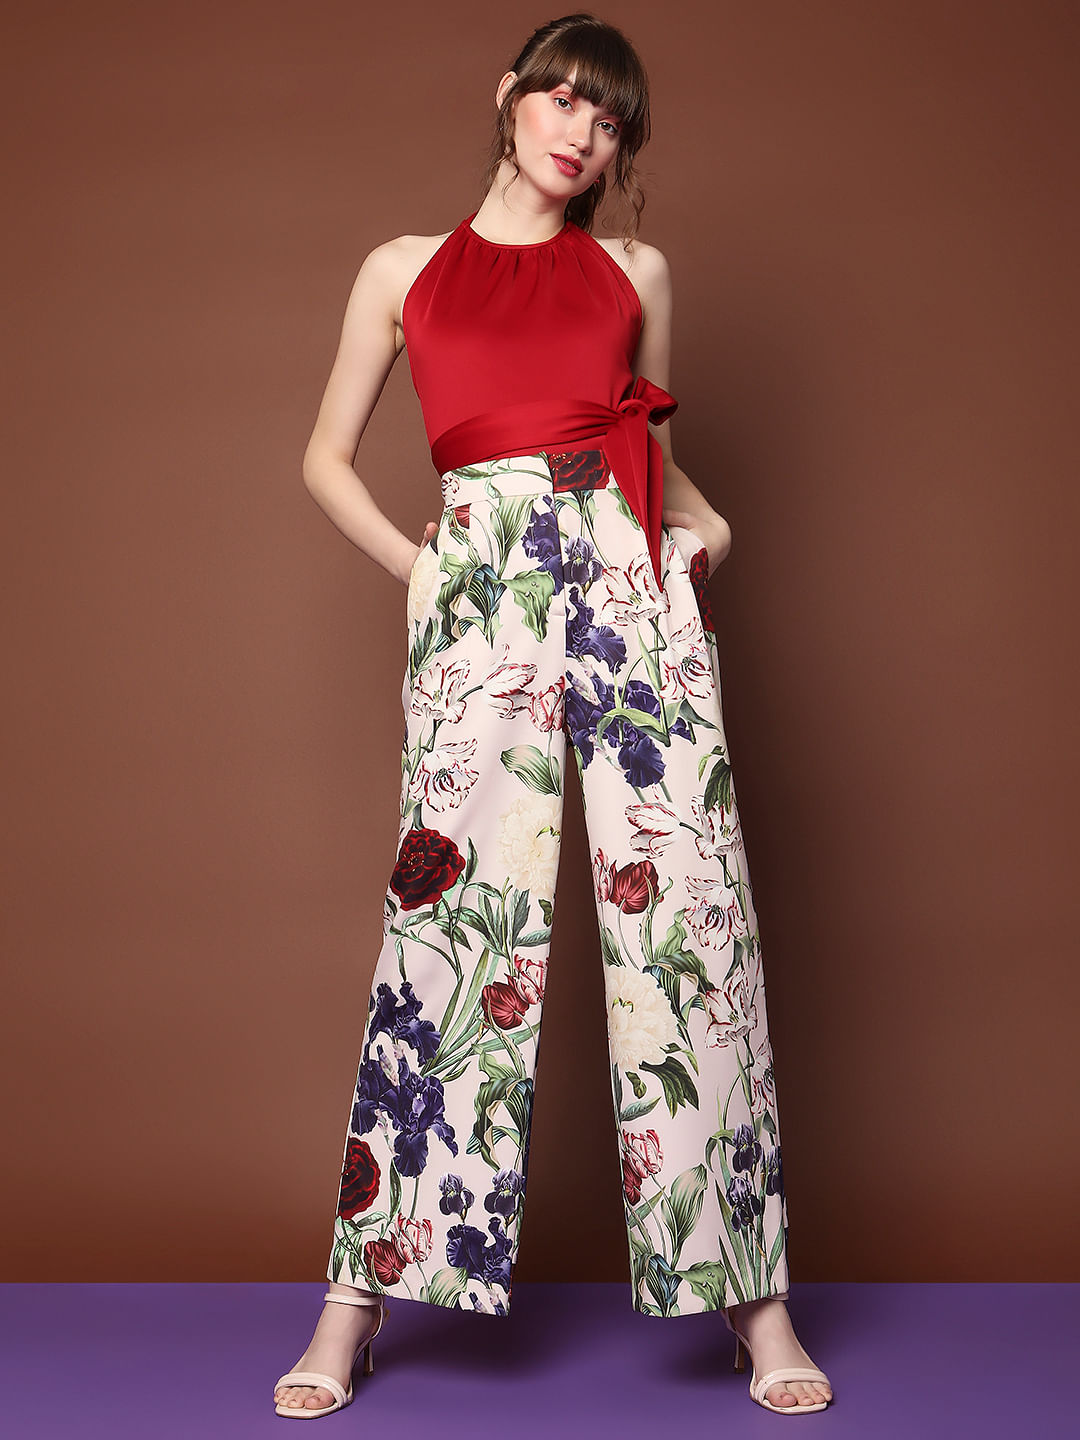 Floral palazzo pants on Pinterest